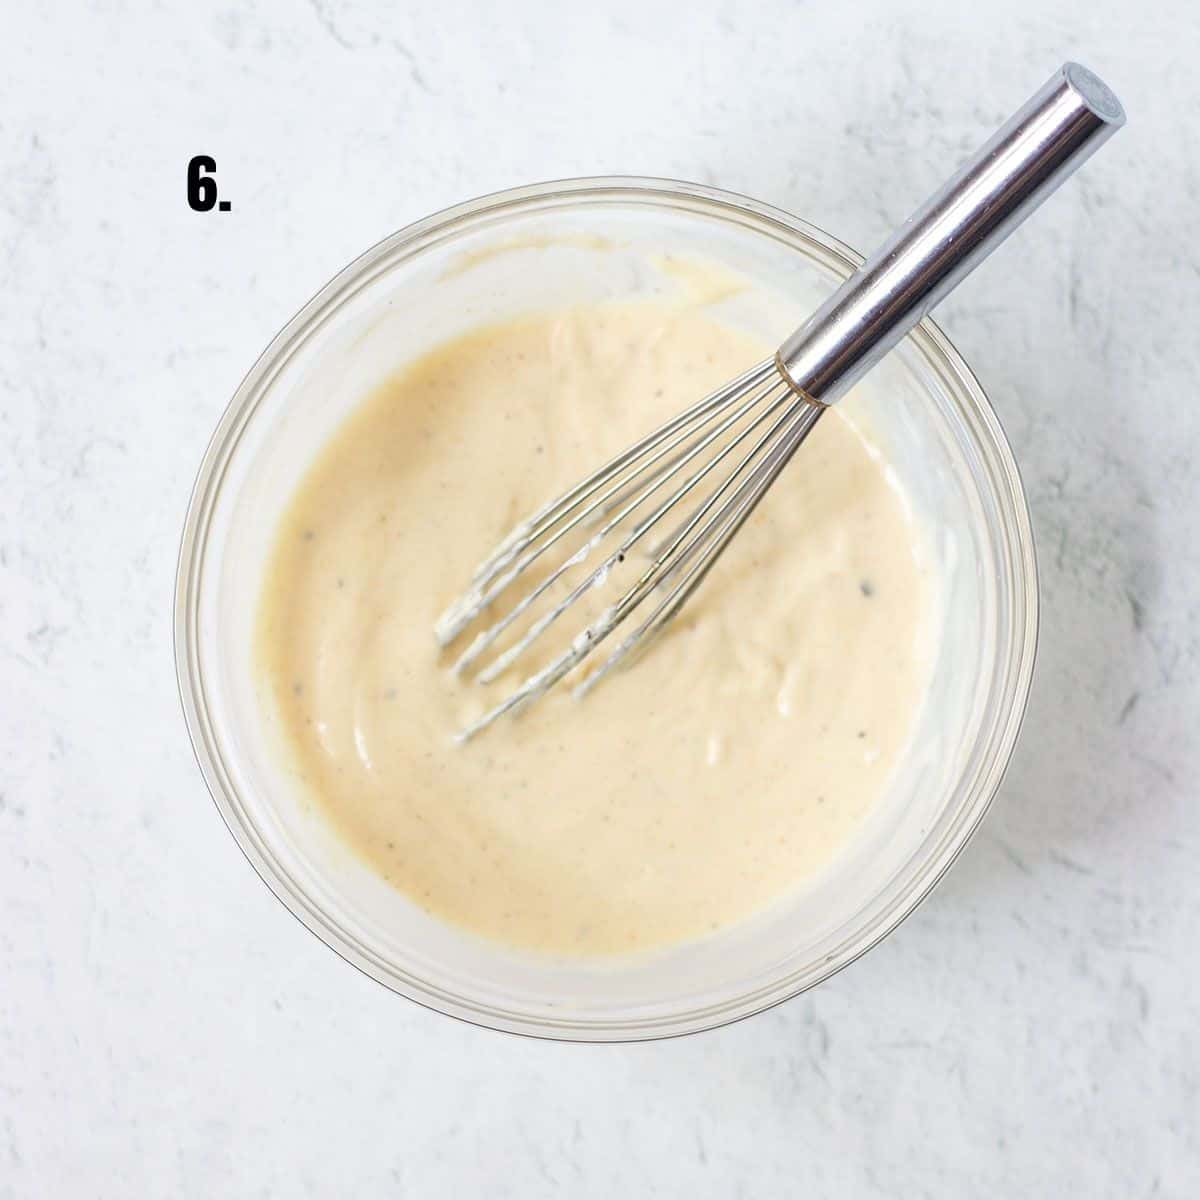 honey mustard dressing for coleslaw mixed together in a mixing bowl.